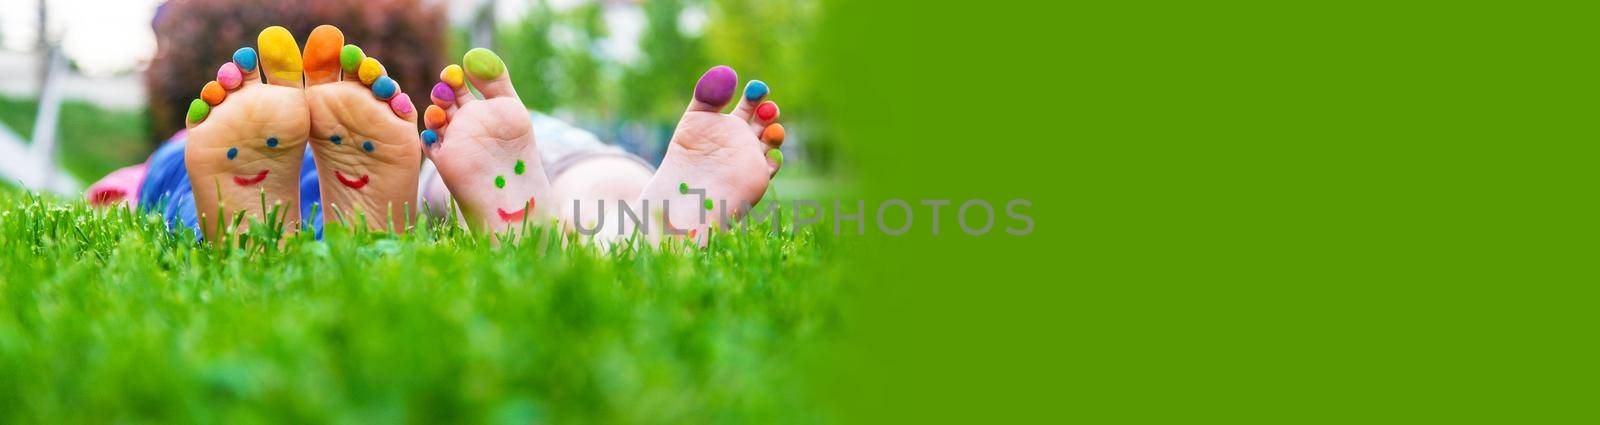 Children's feet with a pattern of paints smile on the green grass. Selective focus. by mila1784